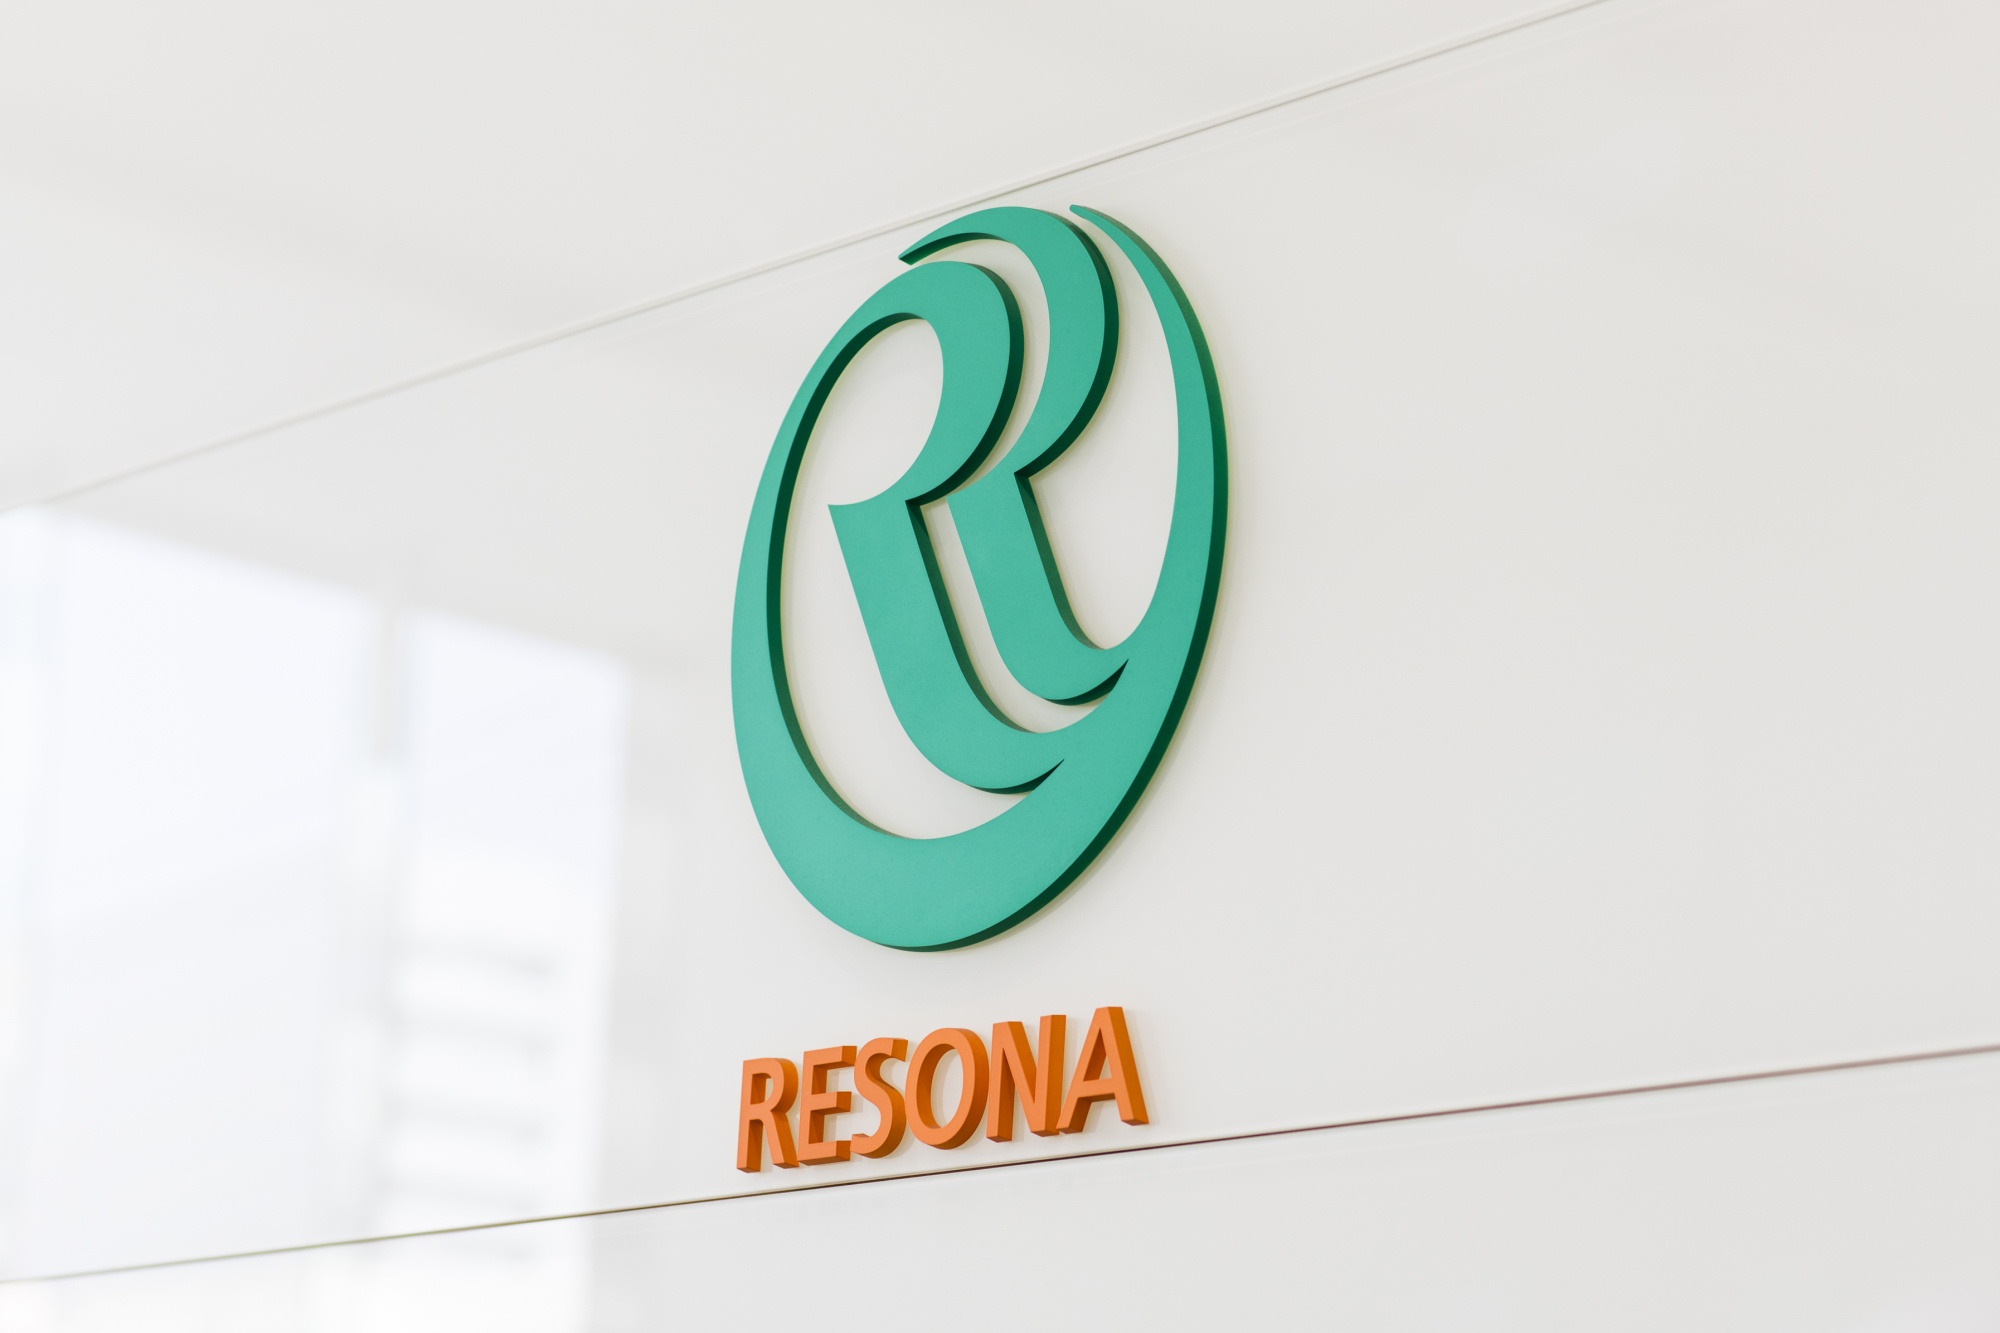 The Resona Holdings Inc. logo is displayed at the company's offices in Tokyo.